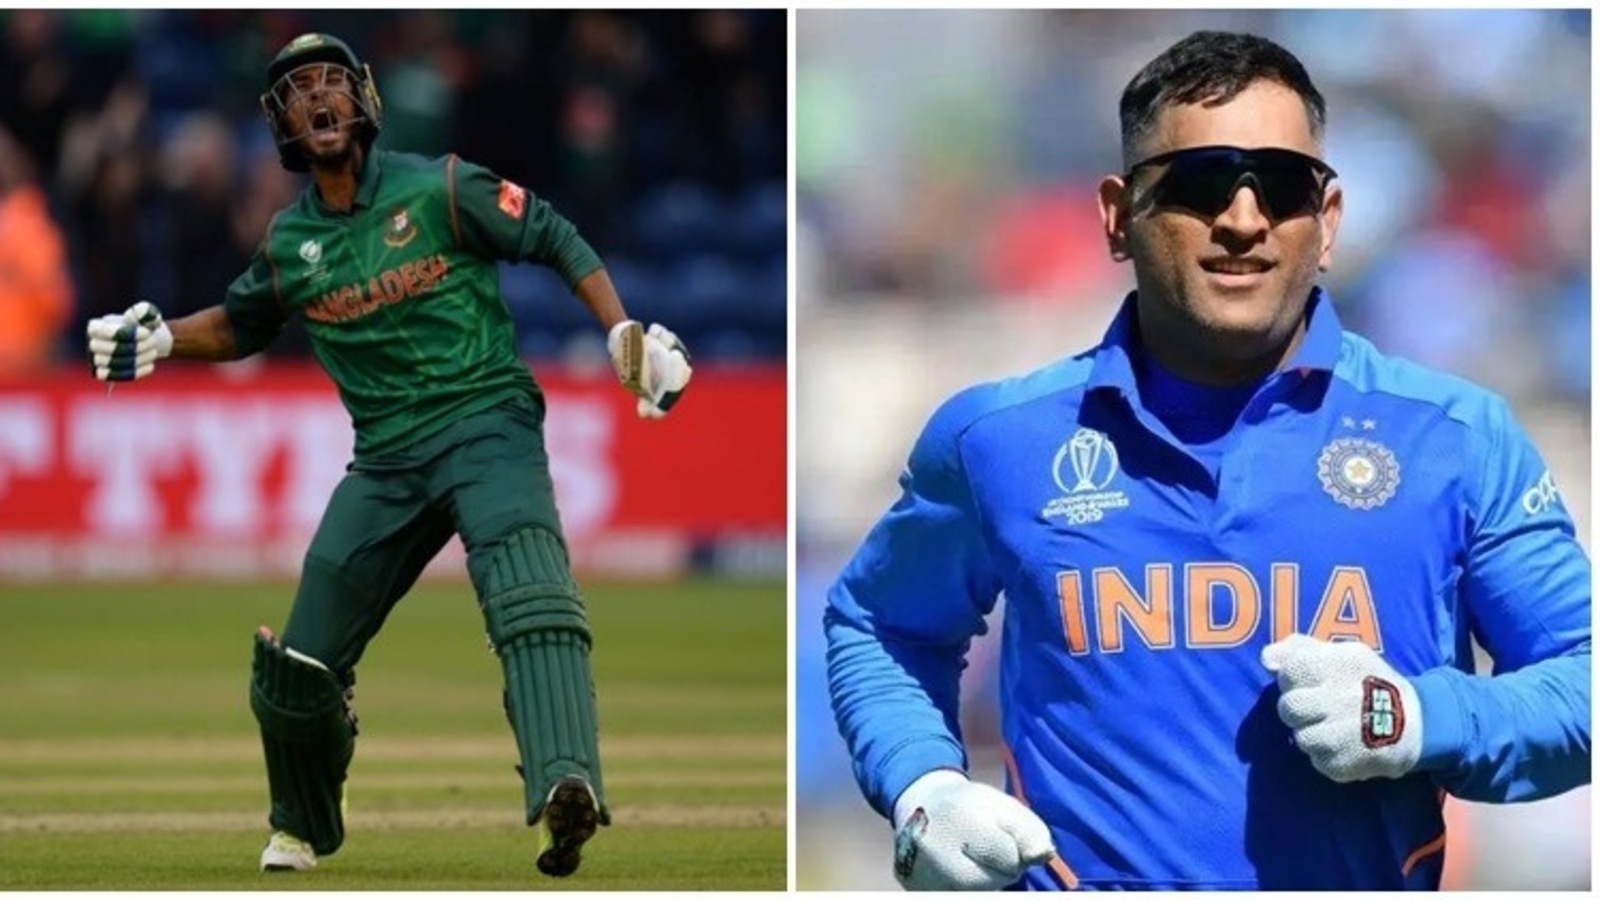 he-batted-at-no-6-finished-like-dhoni-but-msd-couldn-t-play-forever-bangladesh-coach-s-bold-claims-on-mahmudullah